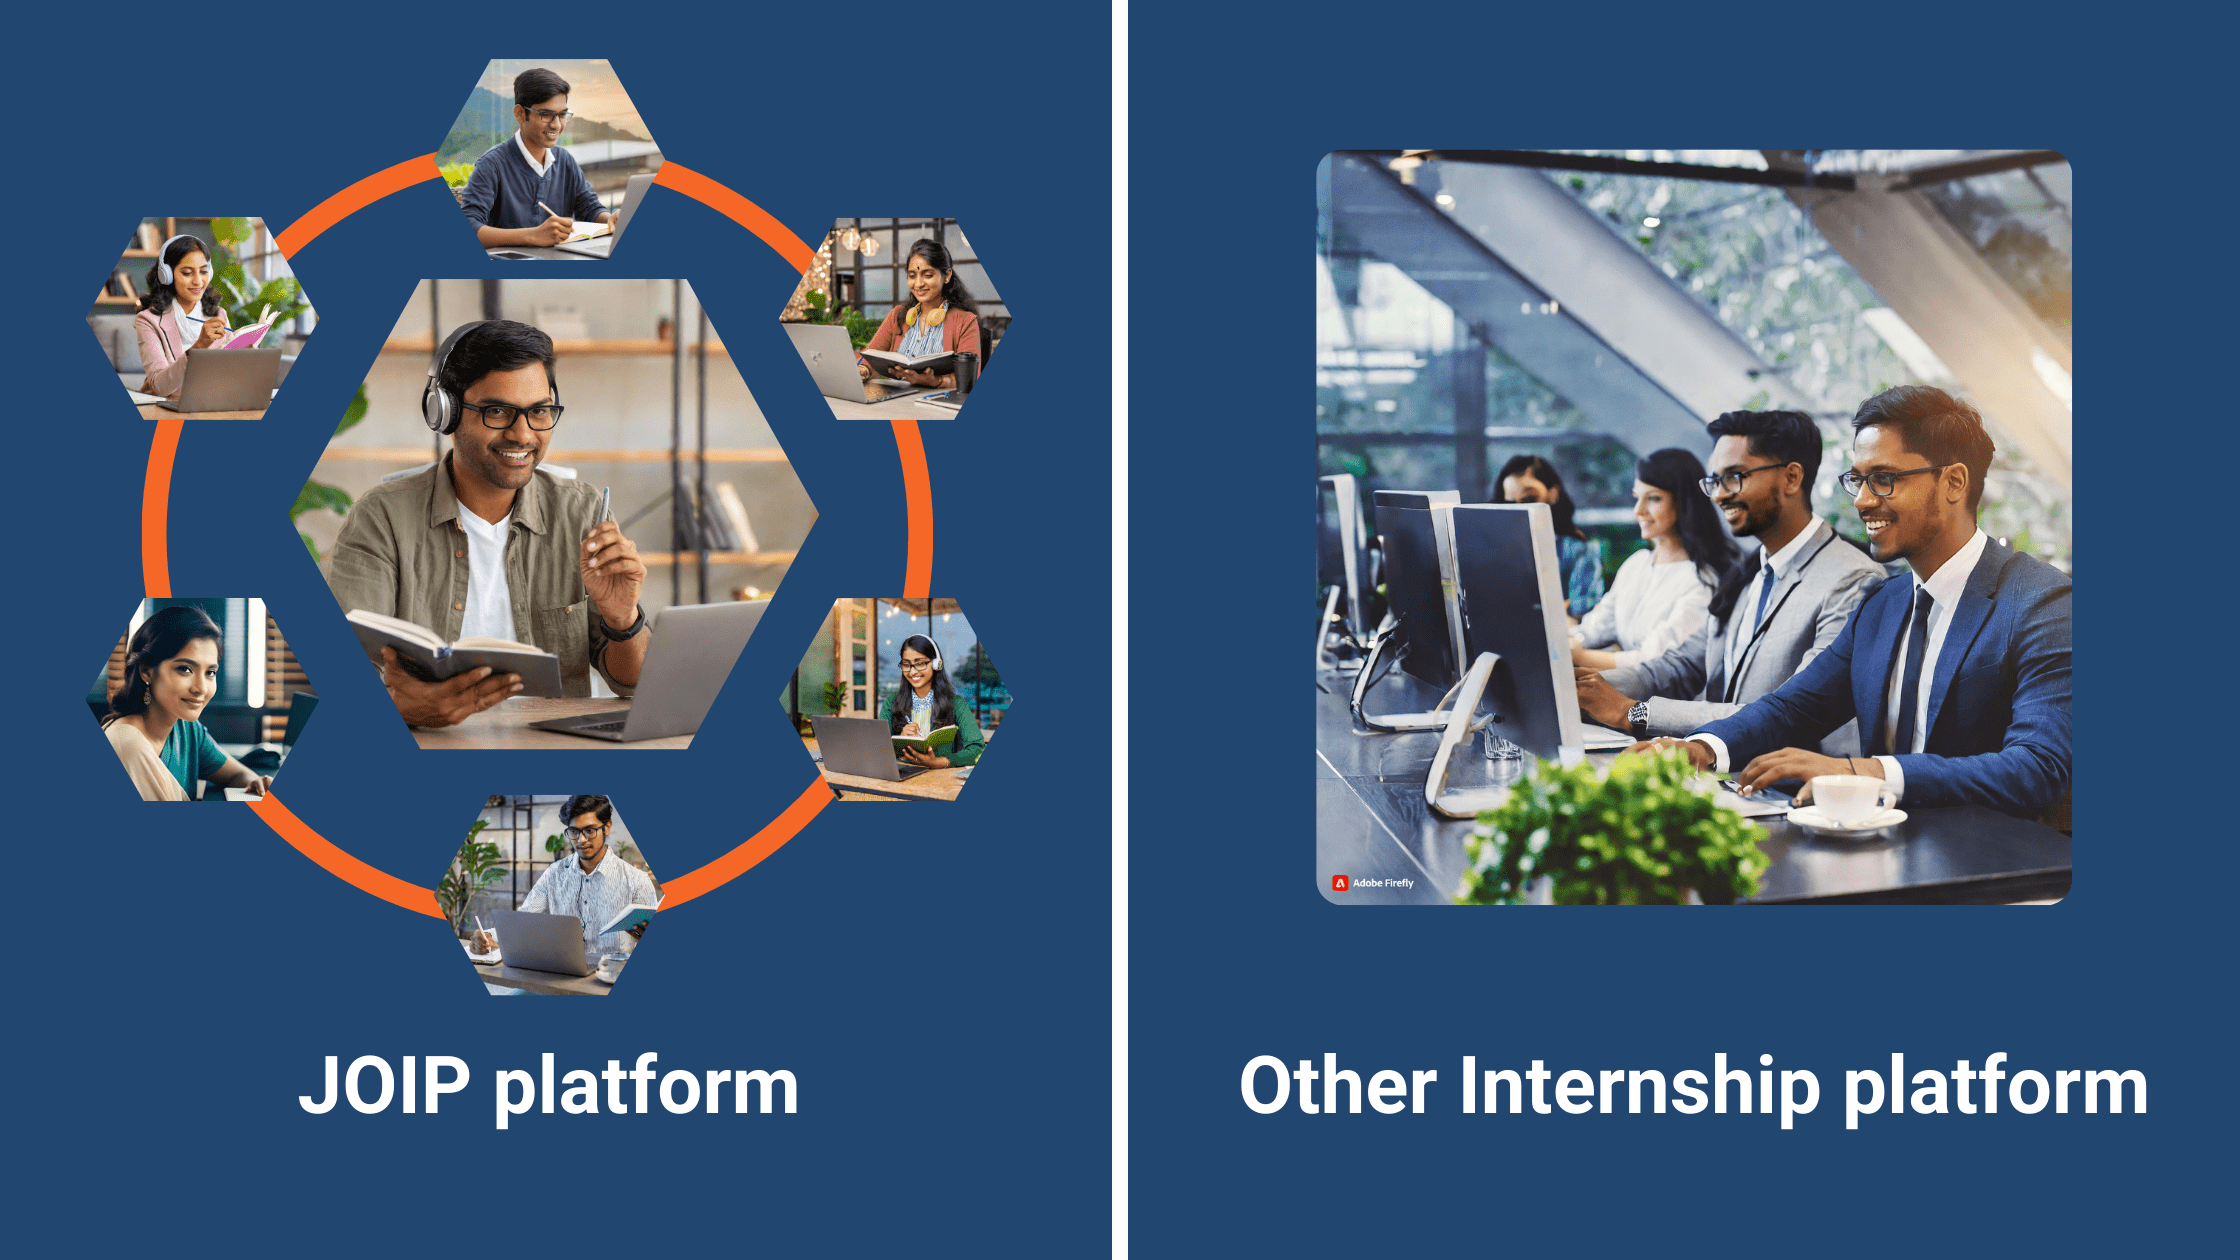 How is JOIP different from other internship platforms